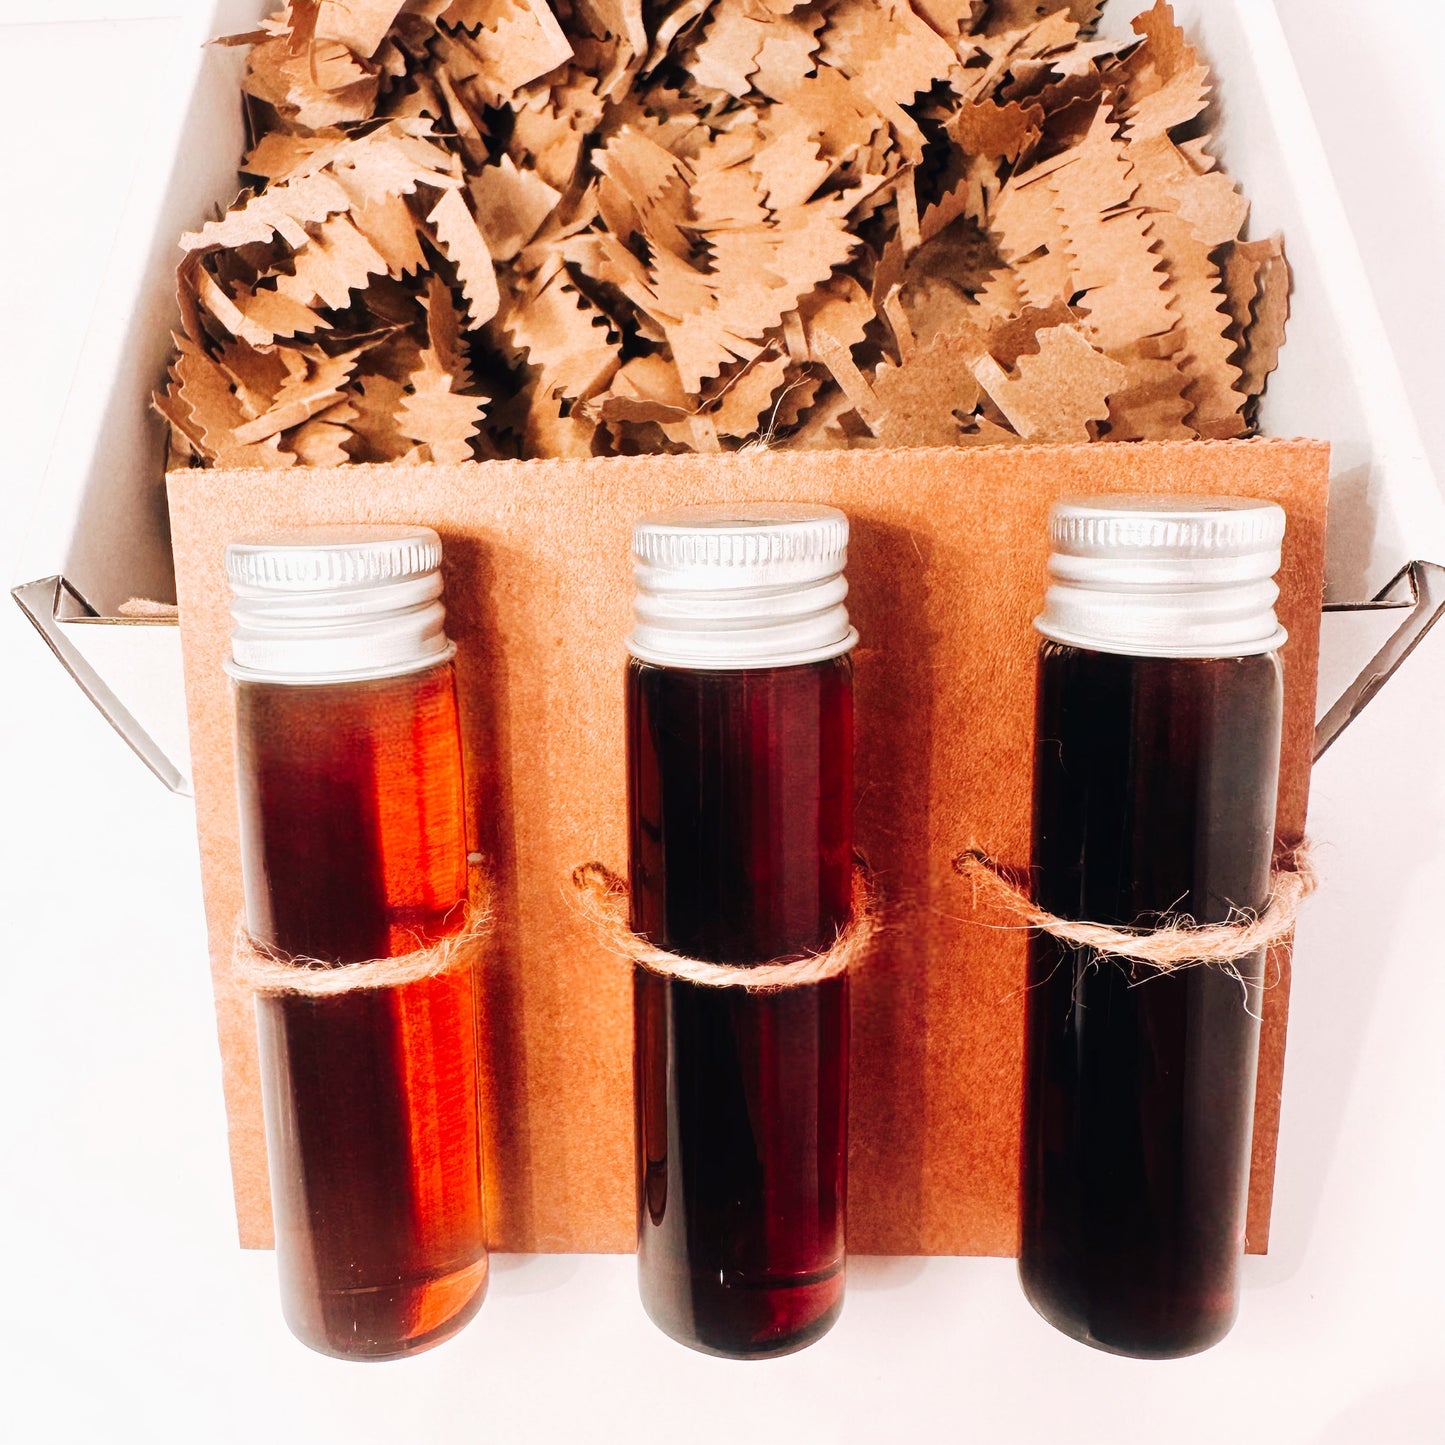 Pure Canadian Maple Syrup Discovery Box Sample Kit - Perfect for Choosing Your Favorite for Your Events